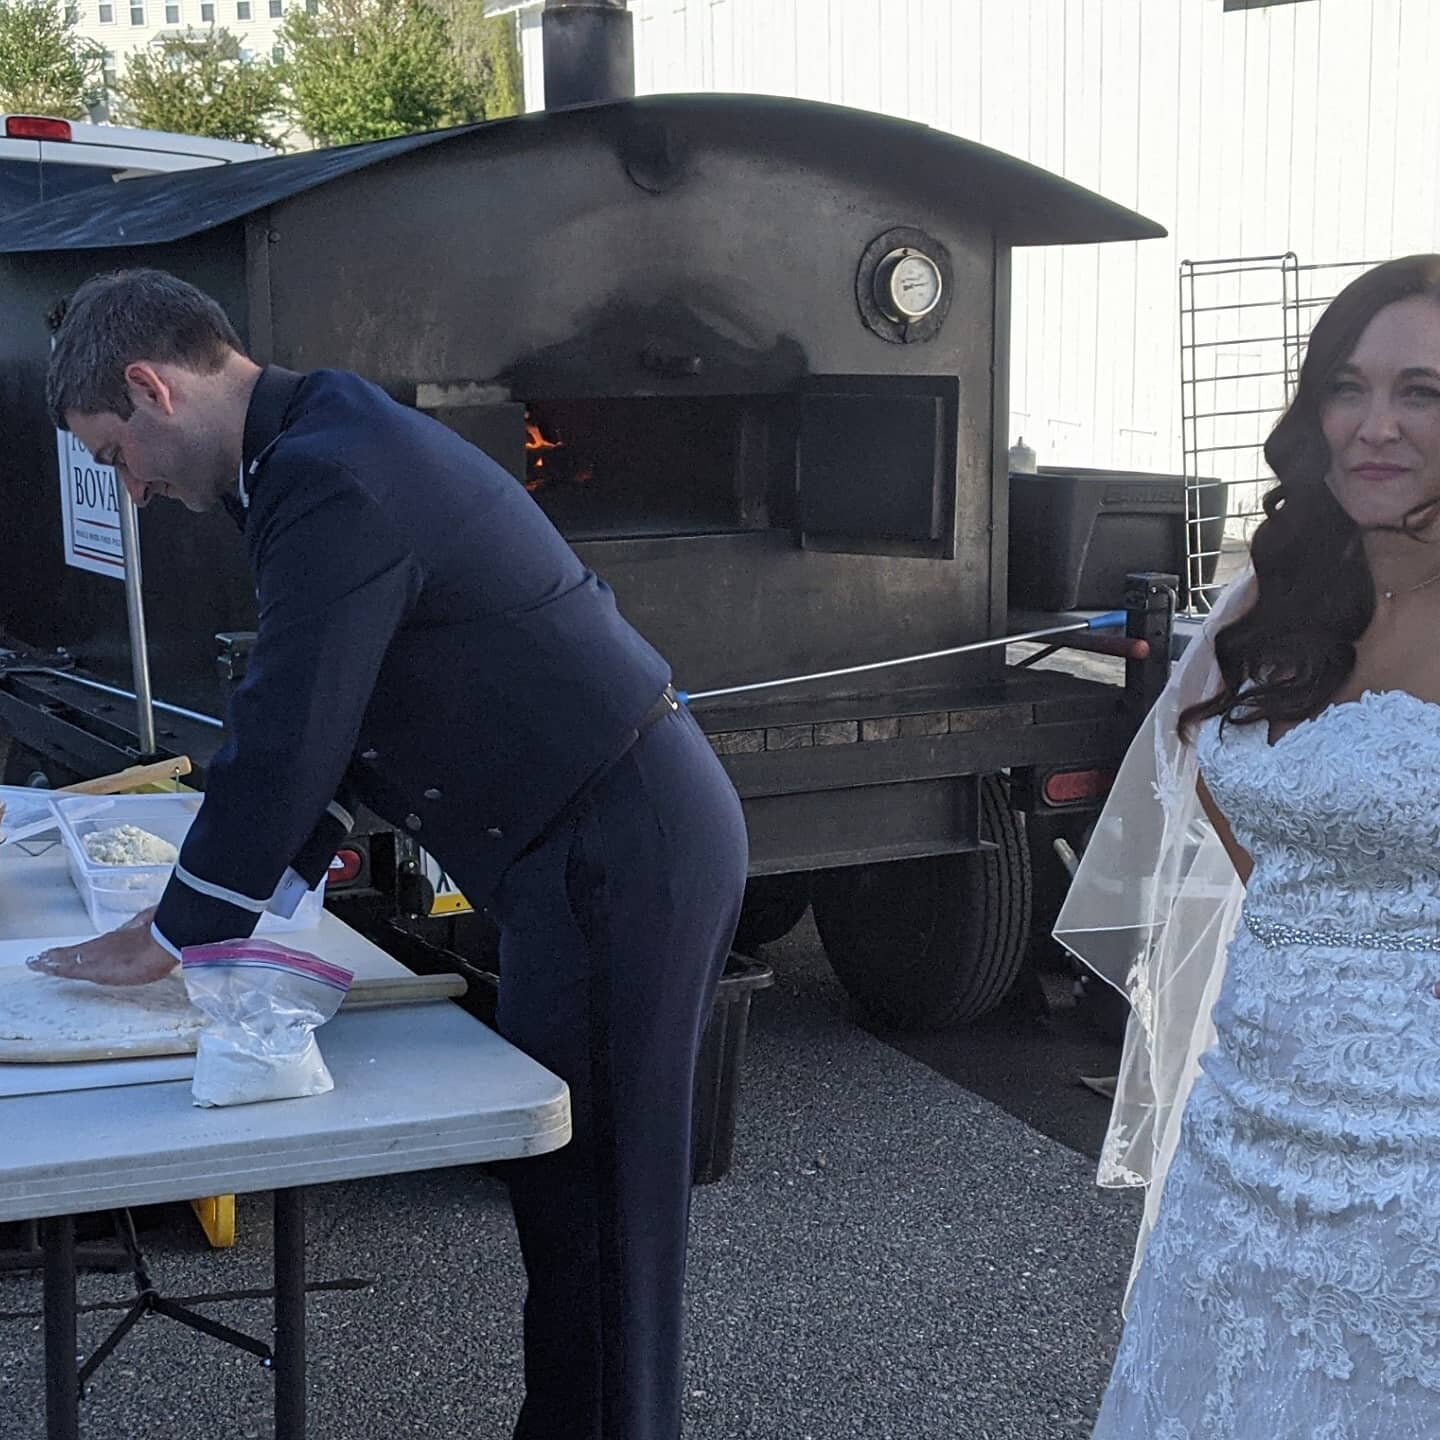 Our couples are the cutest!!! The groom had to stretch the bride's first pizza. 

#pizza #weddingpizza #pizzawedding #catering #centralpaweddings #centralpacaterer